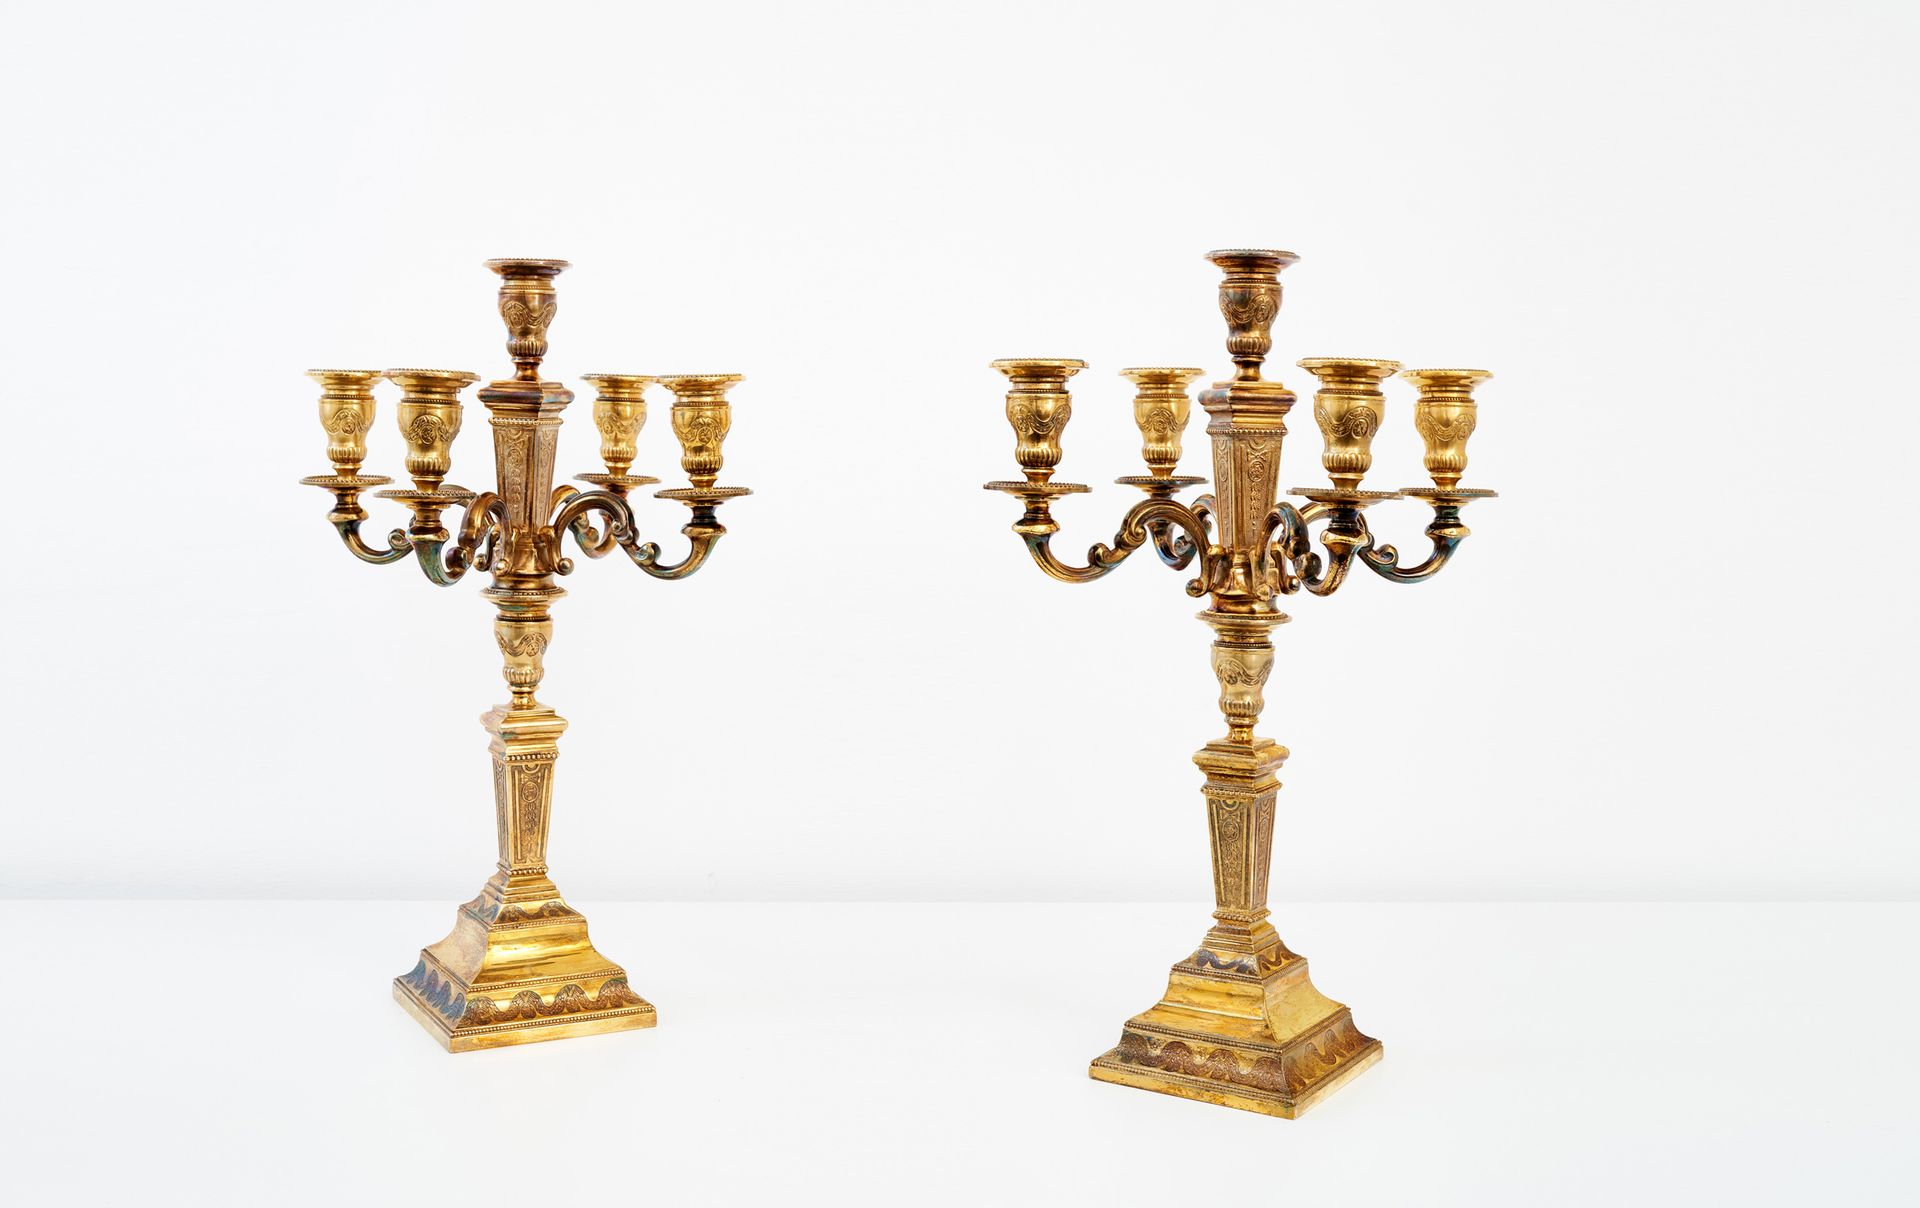 Null A PAIR OF SILVER-GILT CANDELABRAS

In the Louis XVI style 

With 5 candle h&hellip;